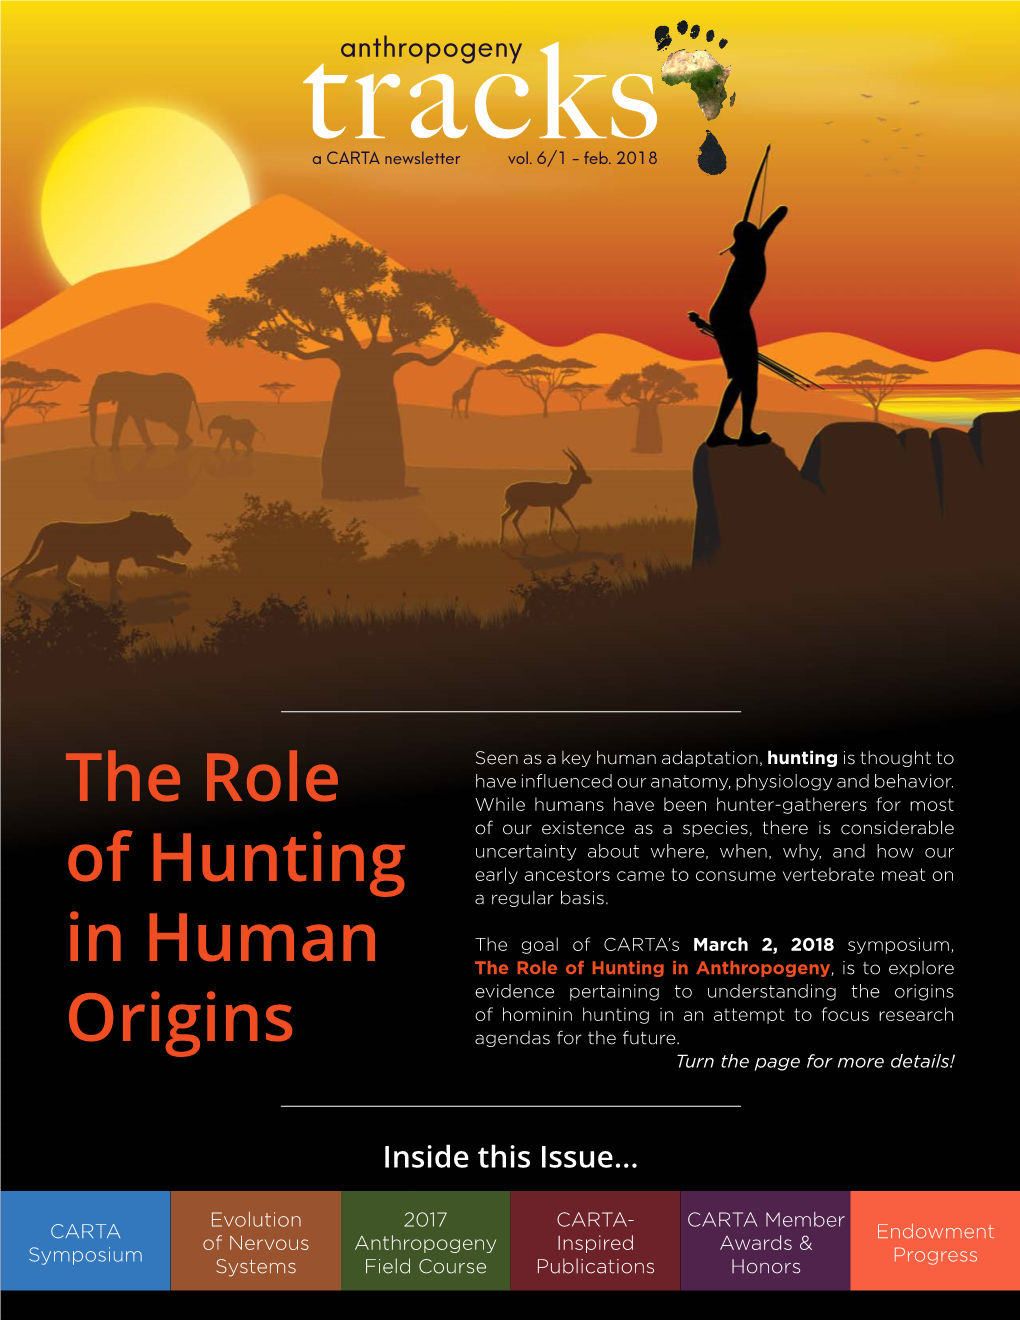 The Role of Hunting in Human Origins